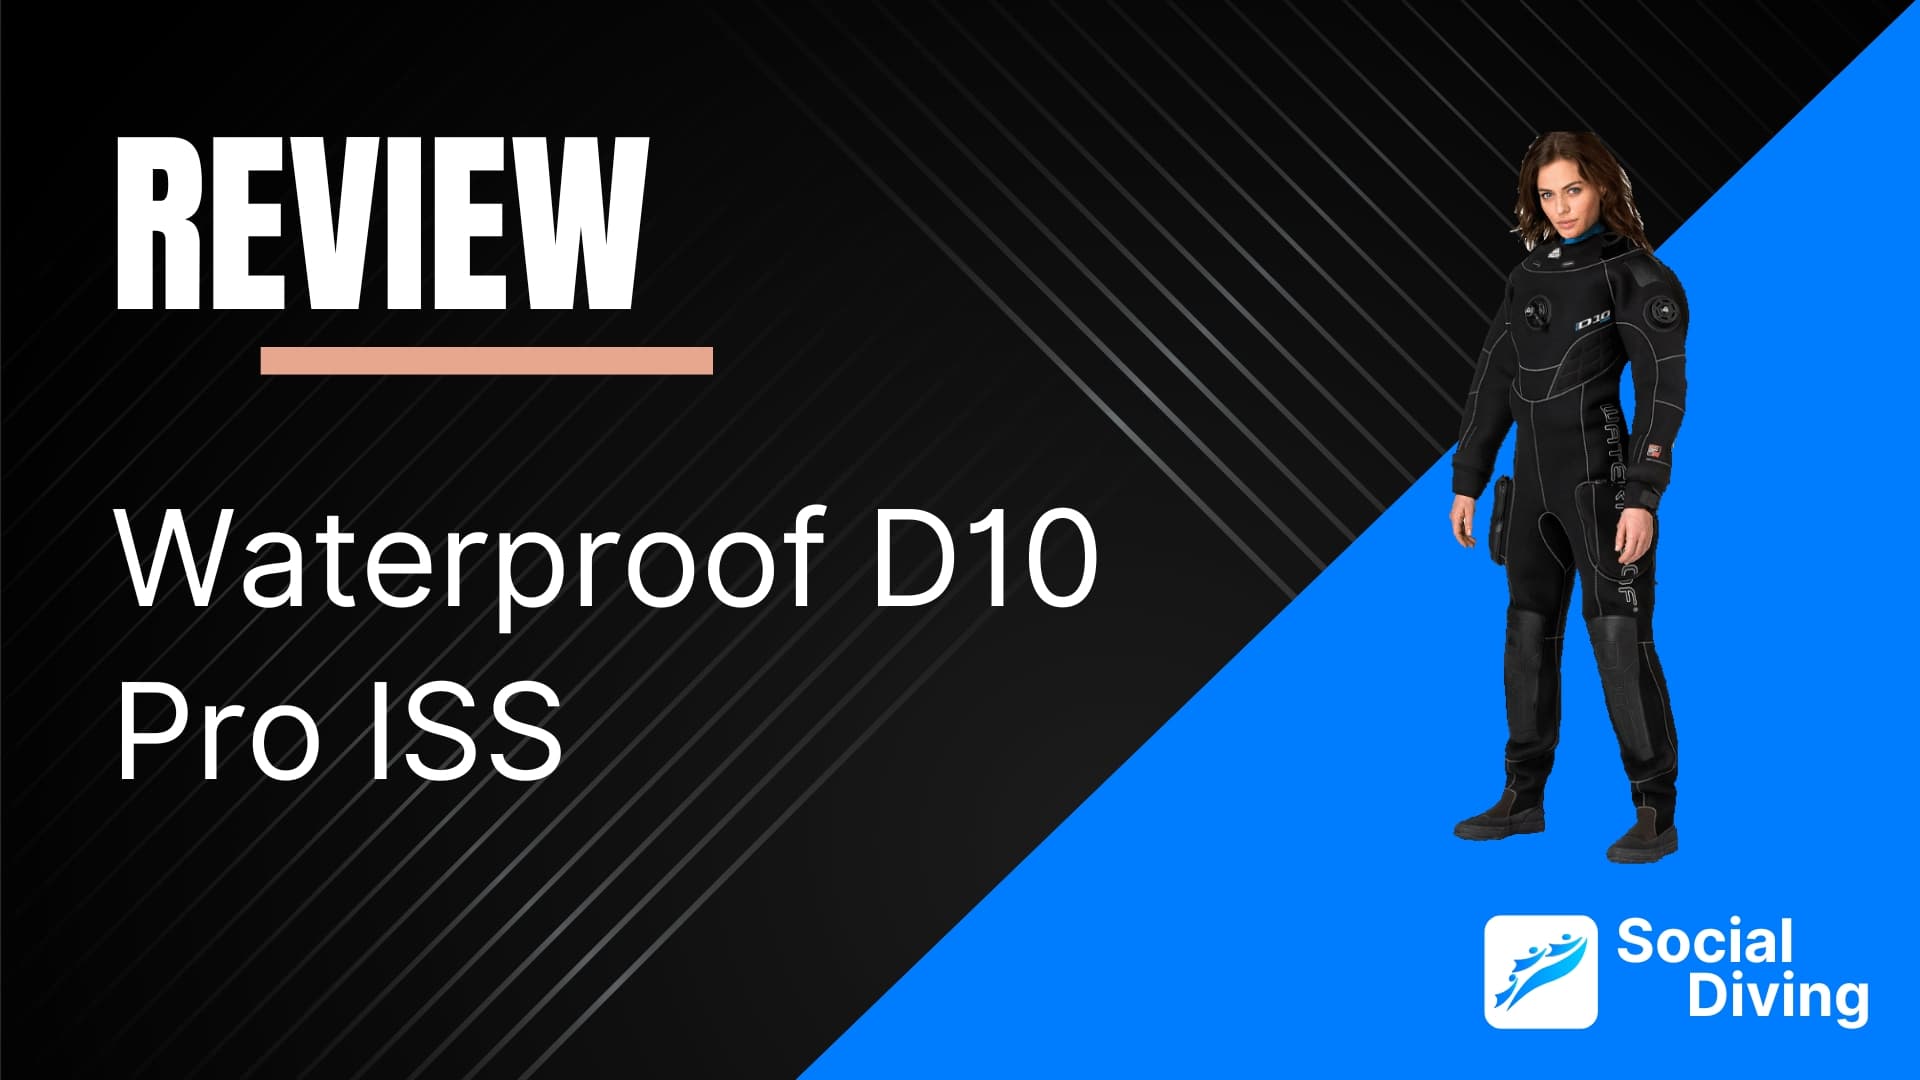 Waterproof D10 Pro ISS review